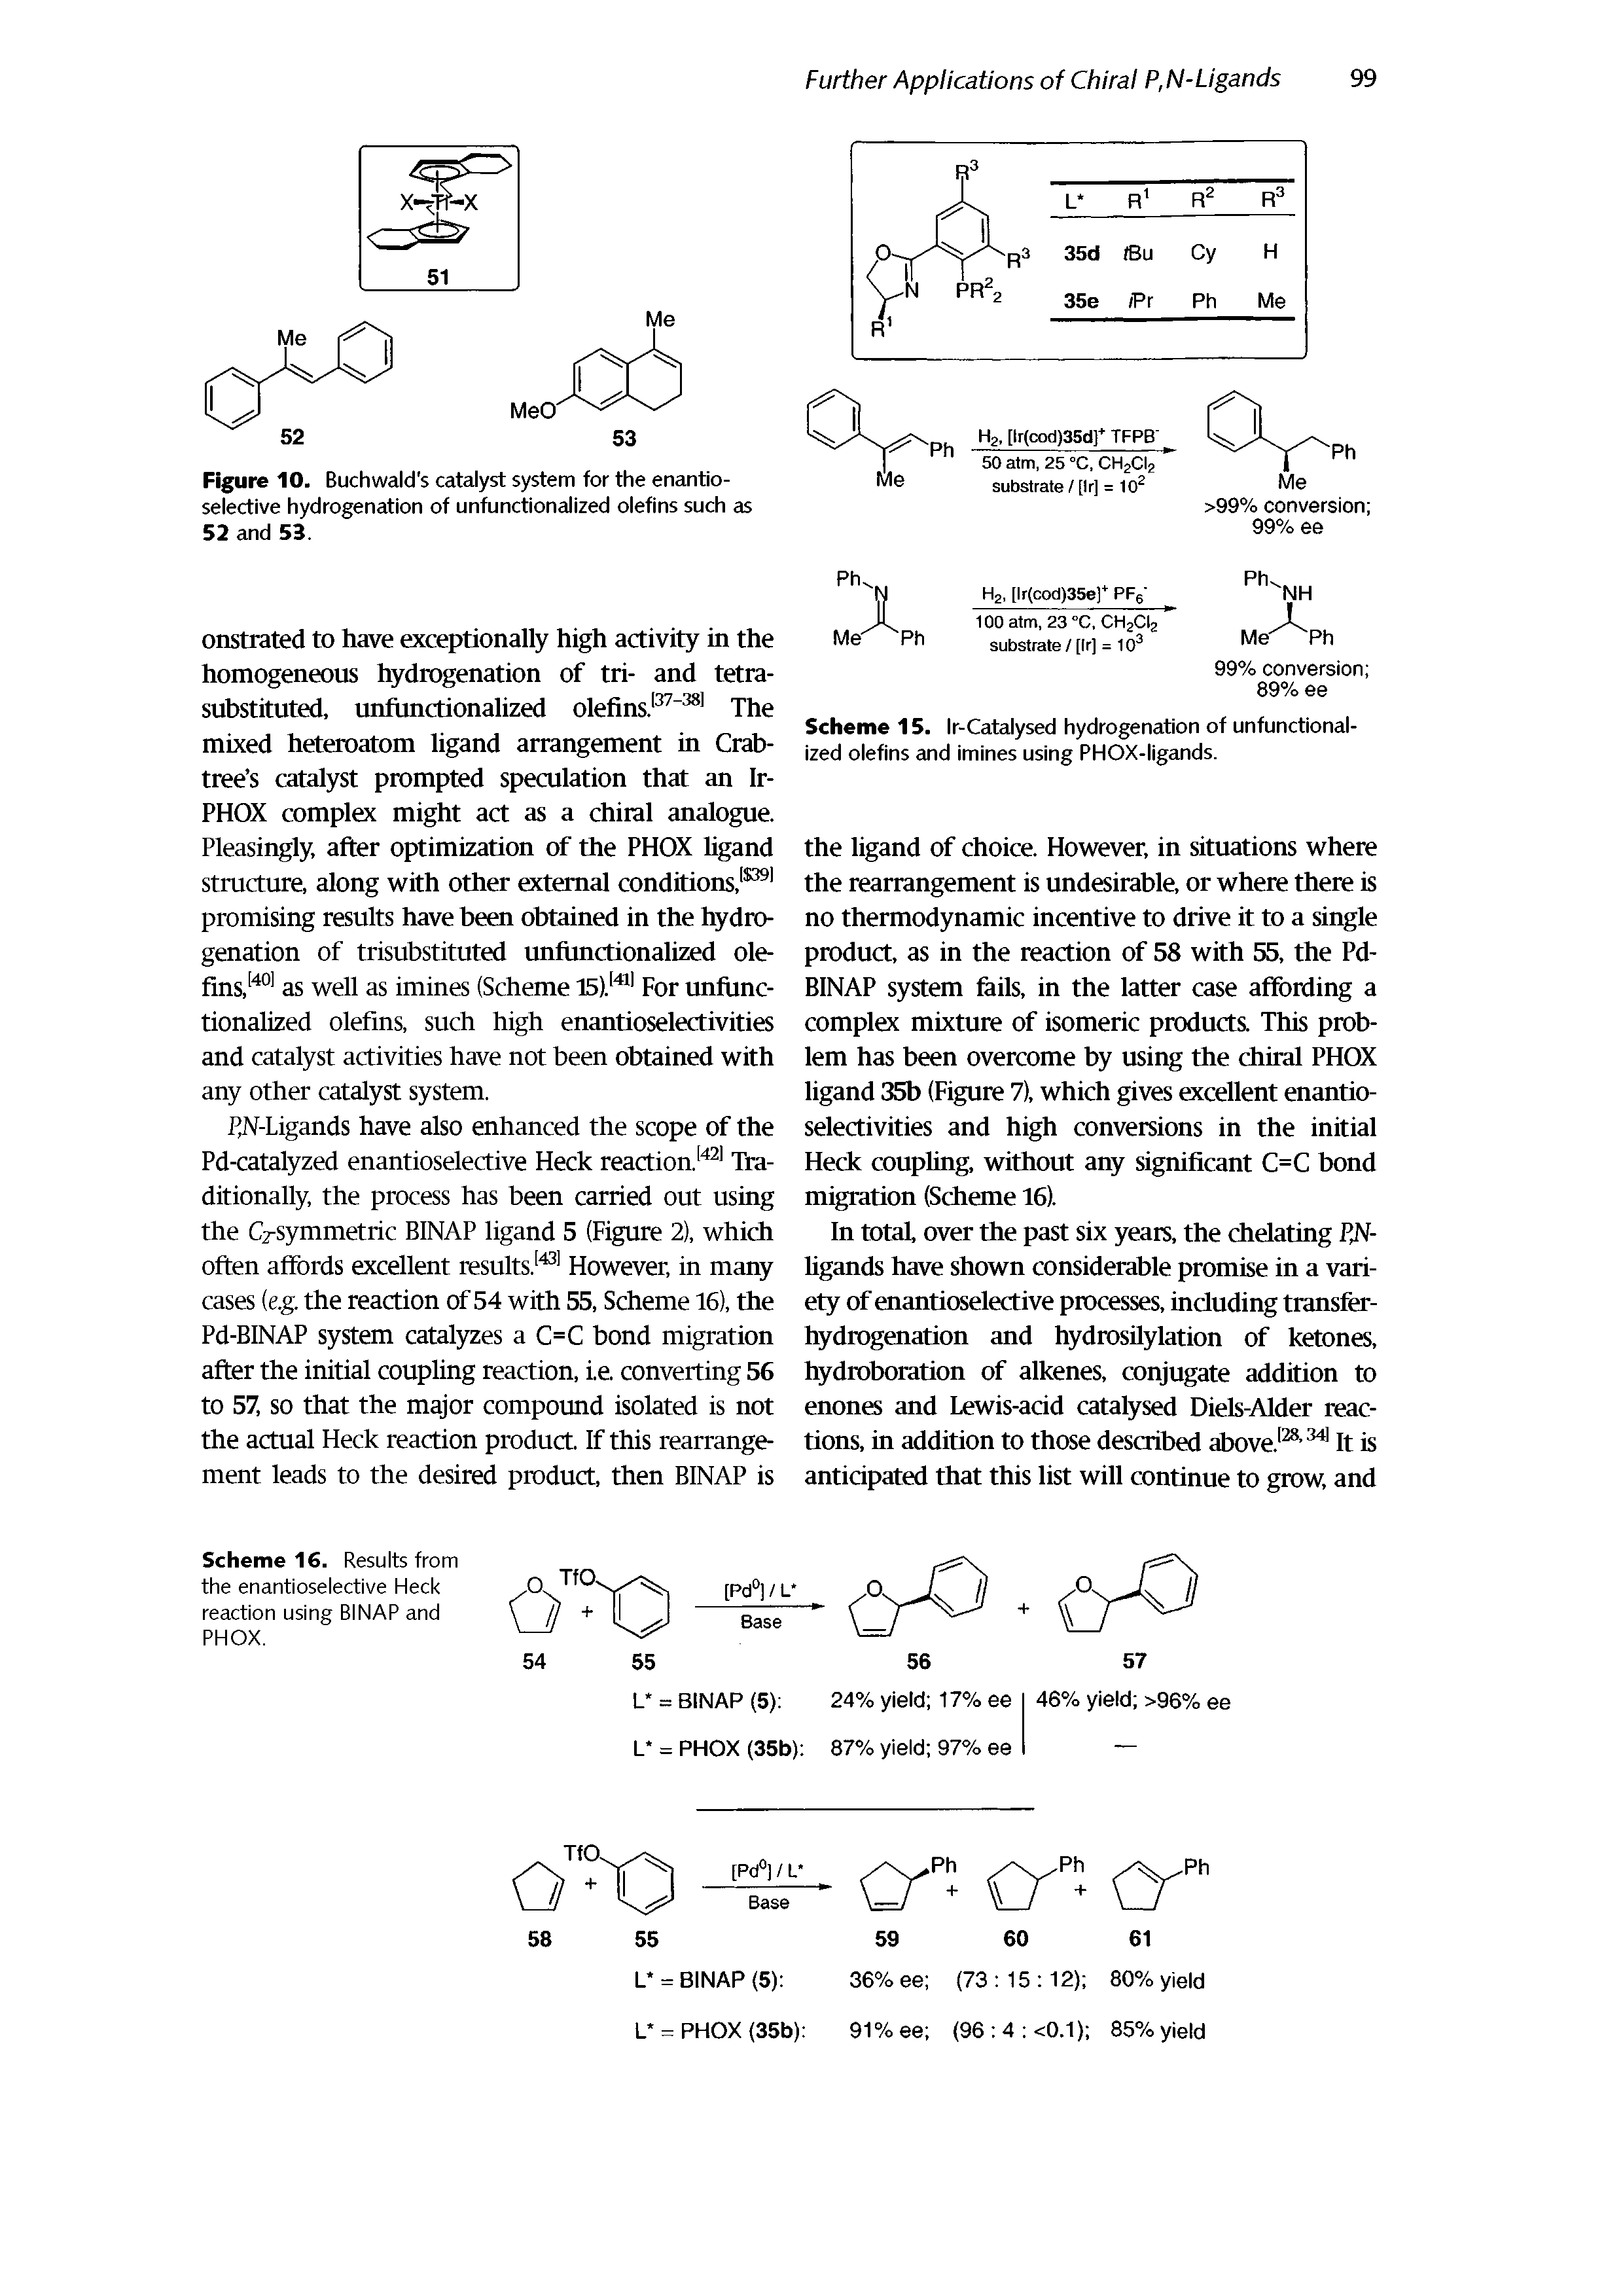 Scheme 15. Ir-Catalysed hydrogenation of unfunctionalized olefins and imines using PHOX-ligands.